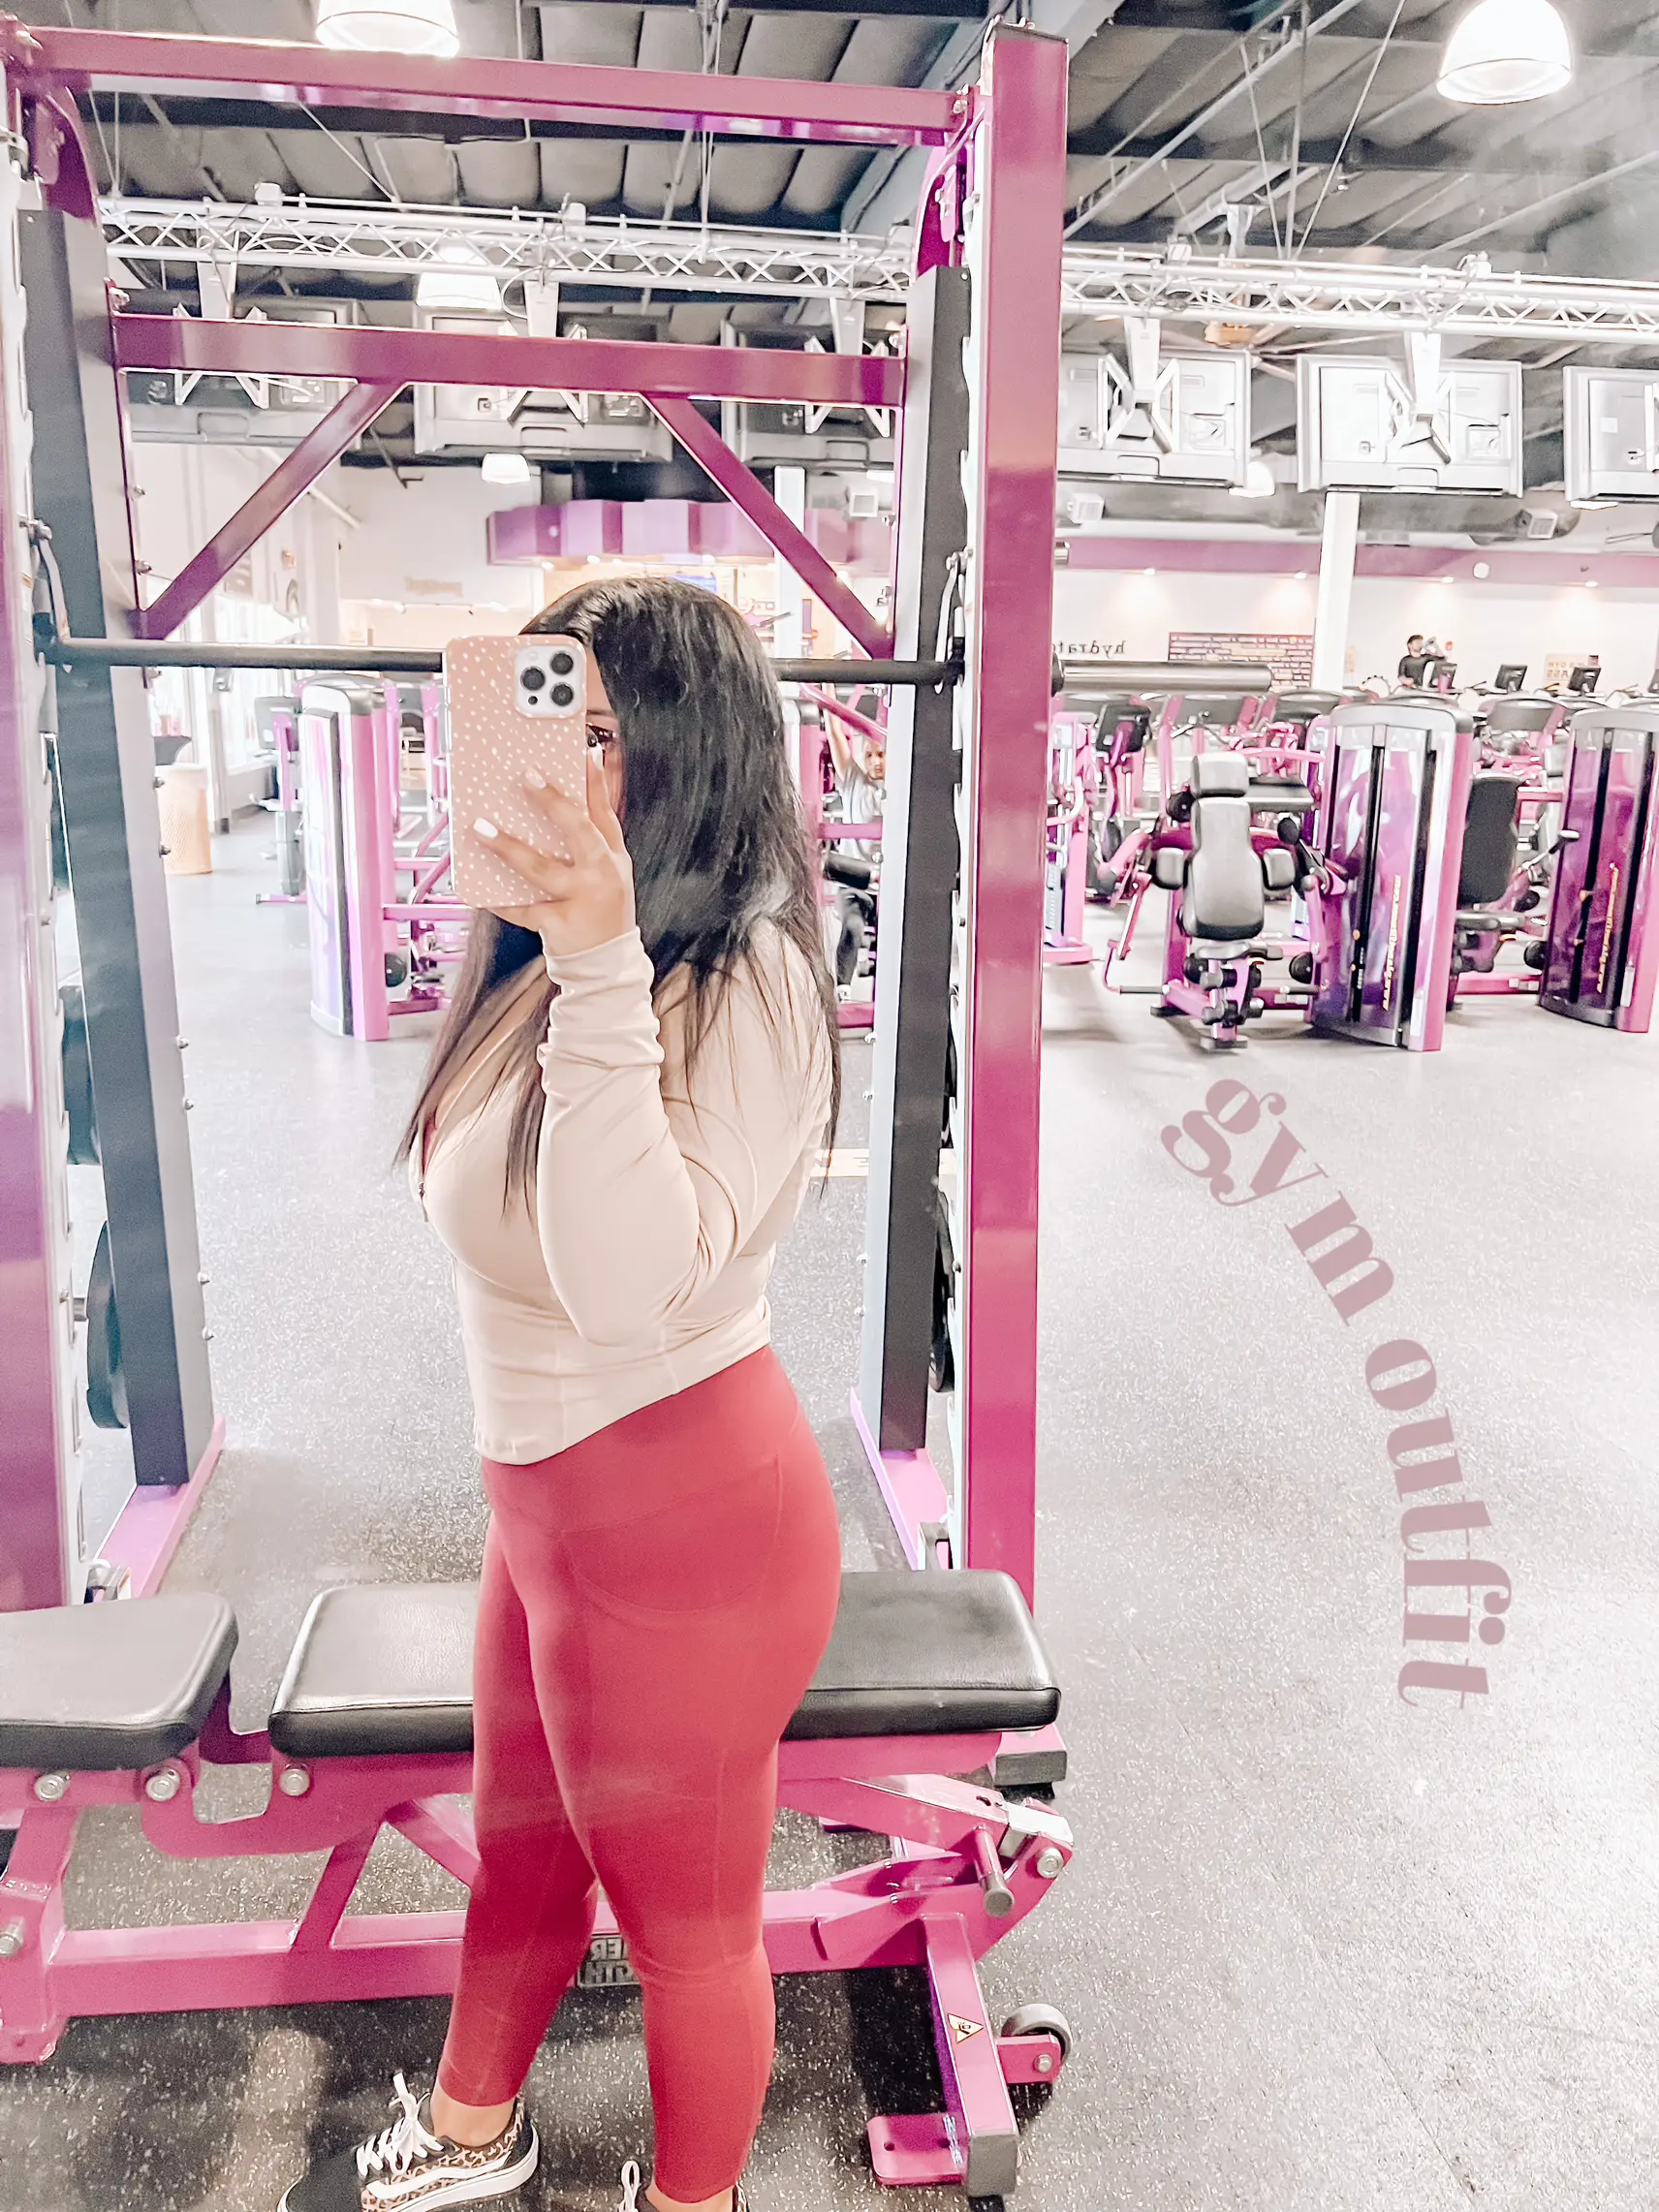 today's workout outfit #gymoutfit #gymgirl #fitness, gym outfit